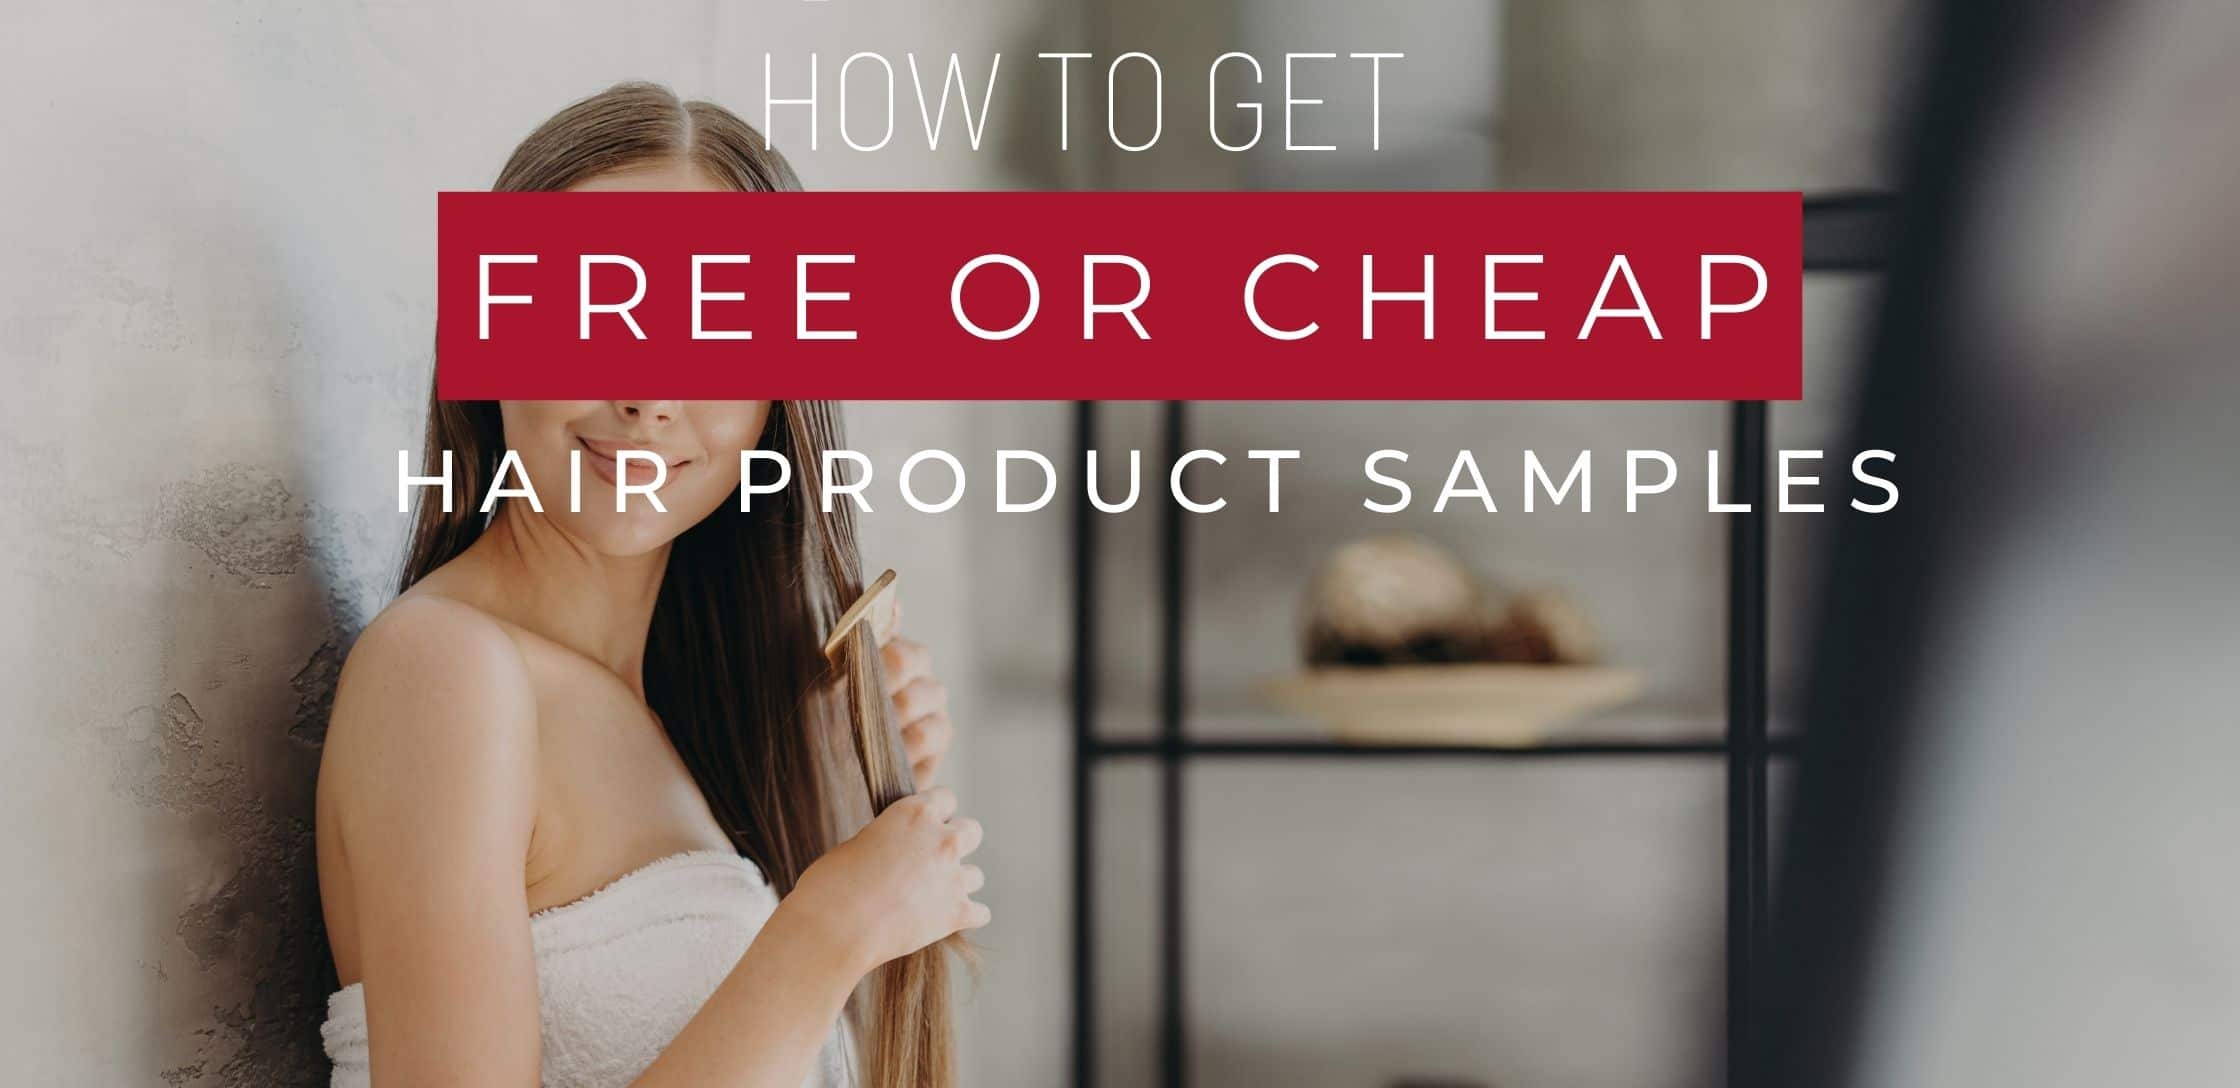 Haircare product sample deals and giveaways